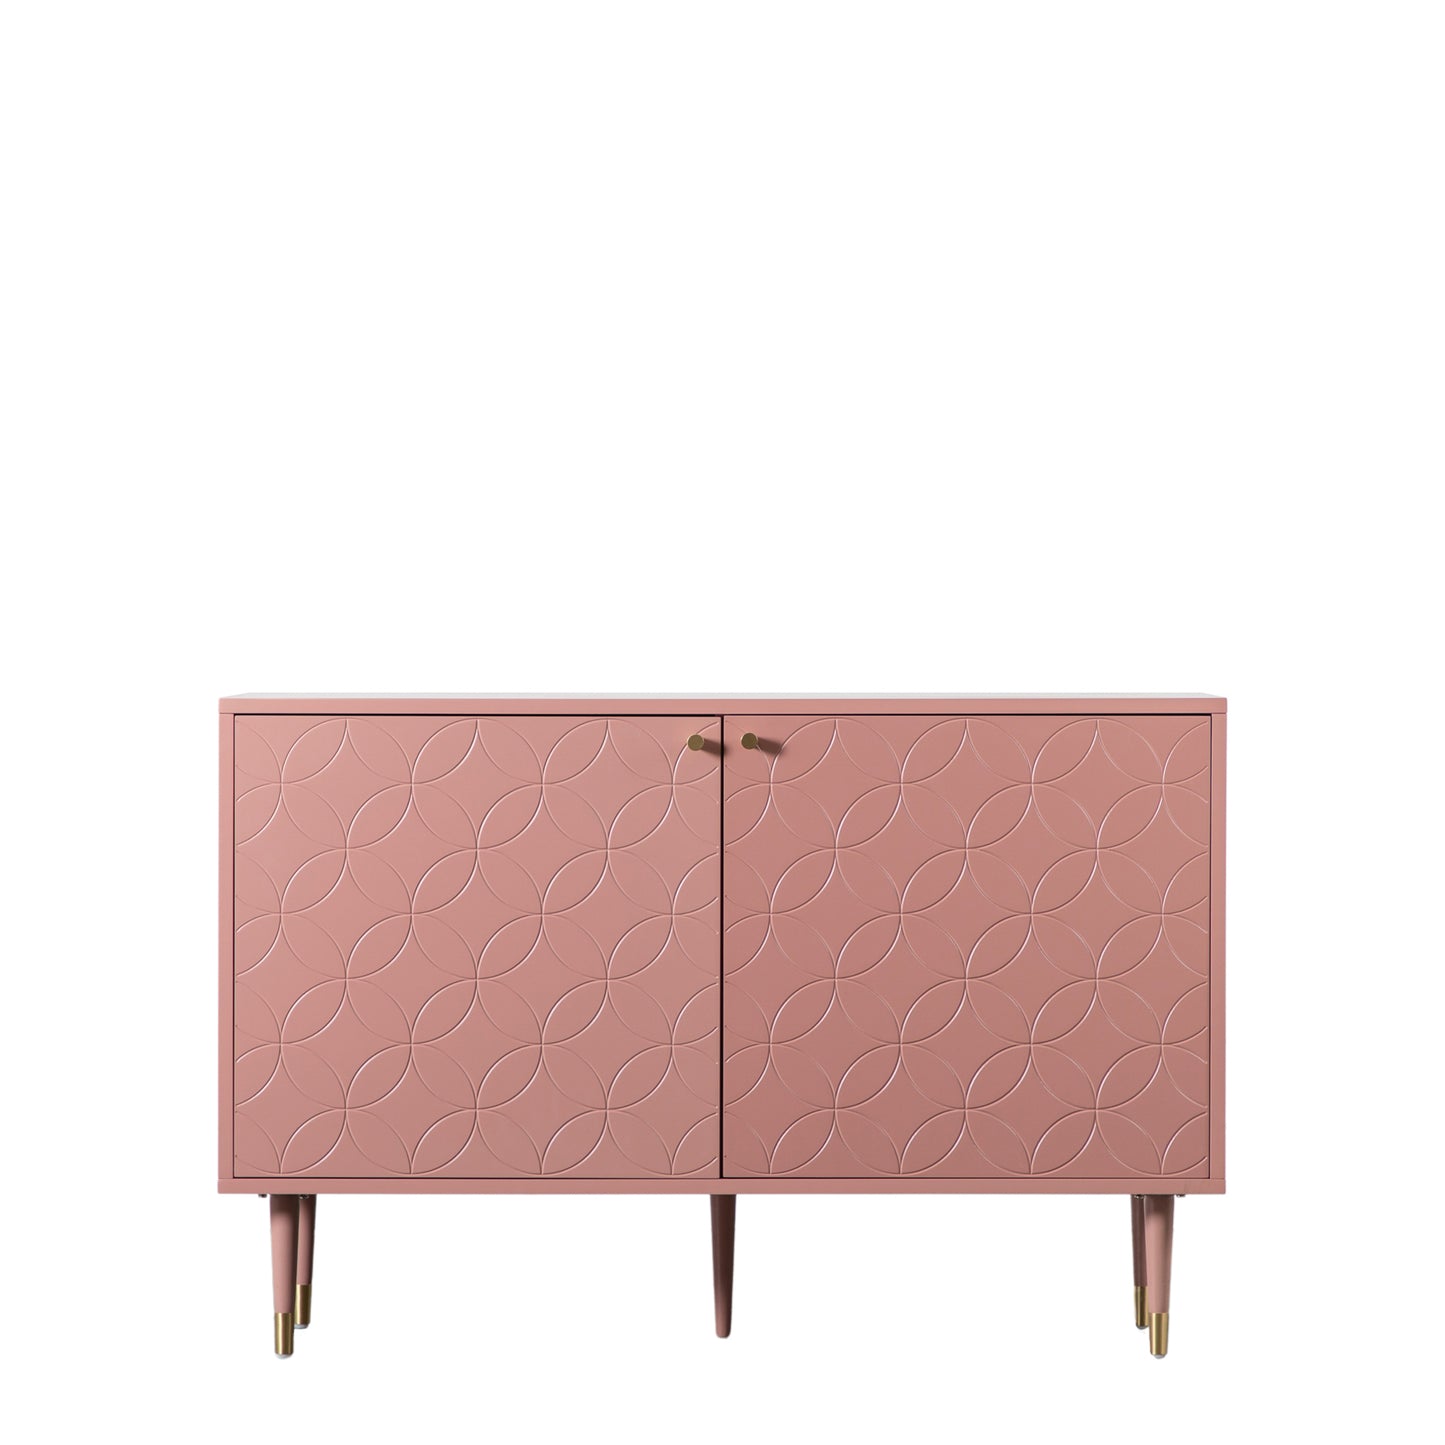 A Thurlestone 2 Door Cabinet in Pink with gold legs, adding a stylish touch to your interior decor from Kikiathome.co.uk.